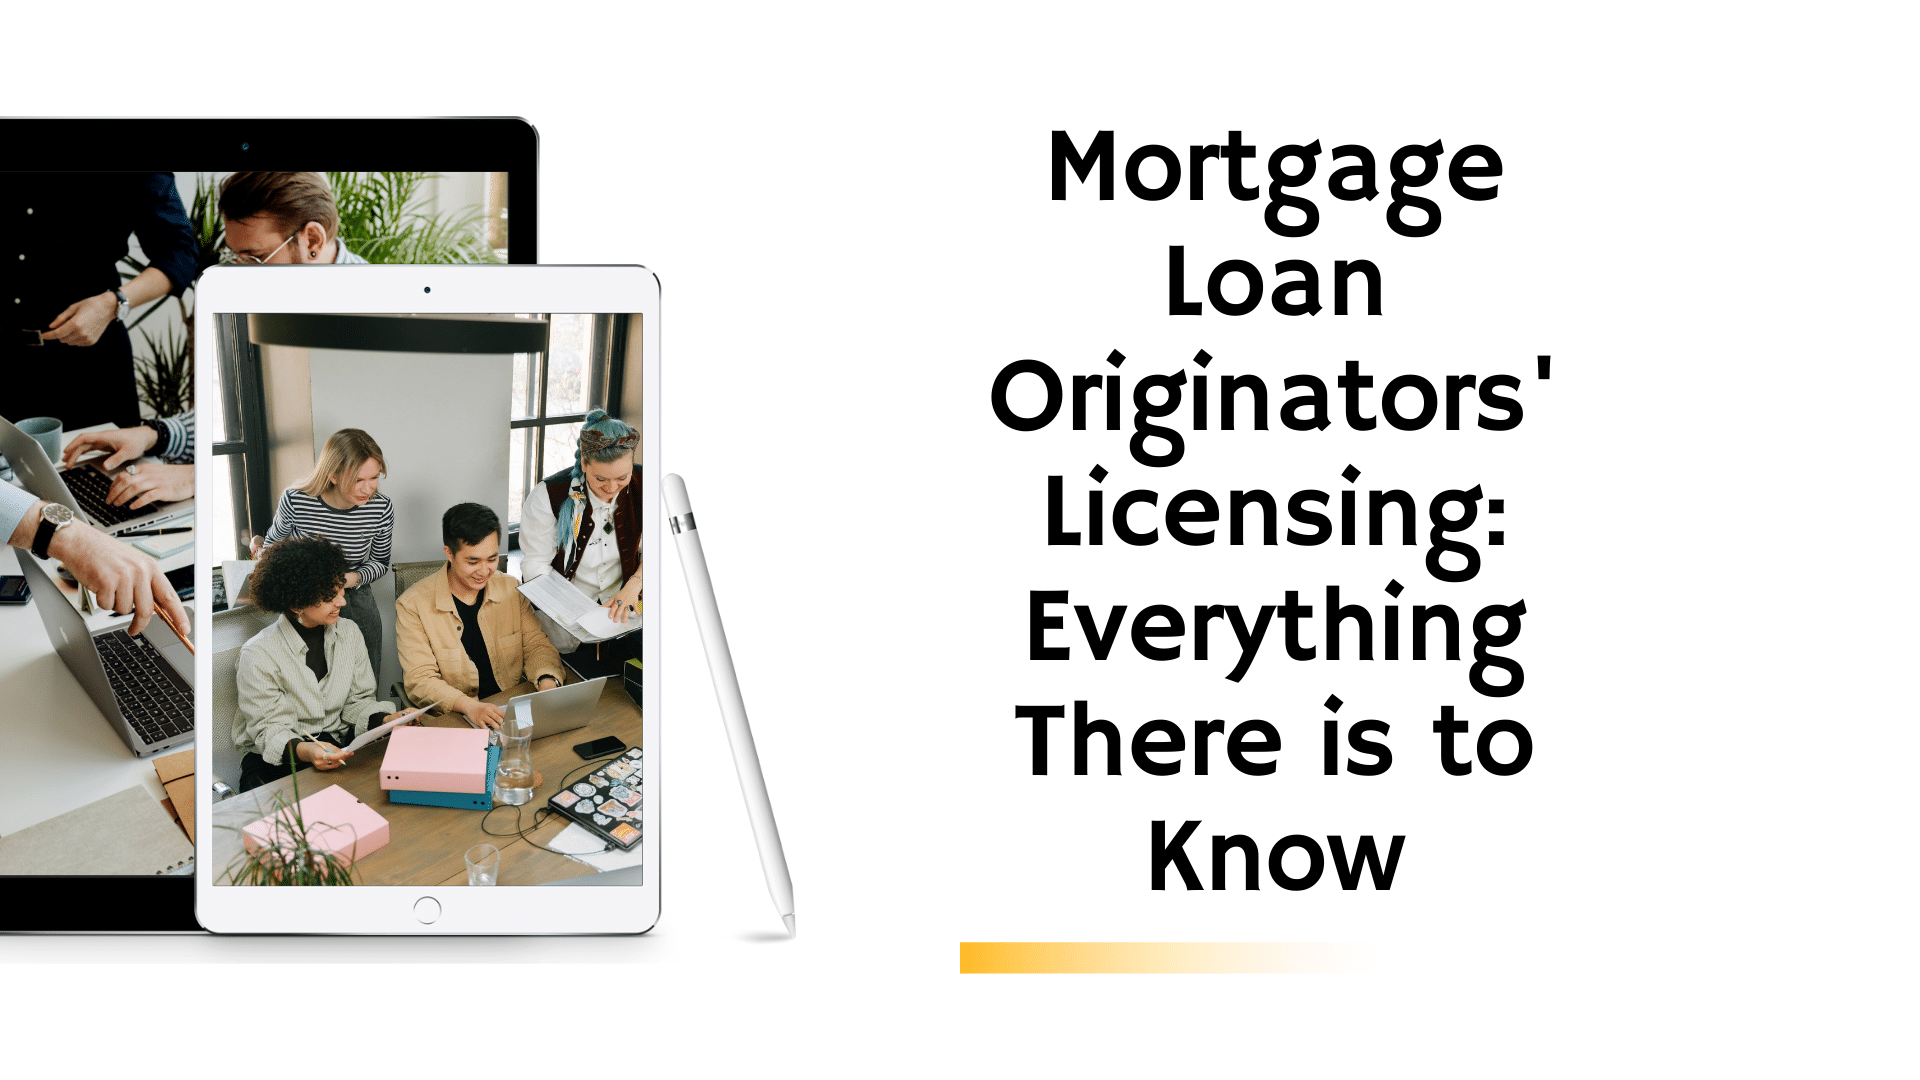 surety bond - What Is a Mortgage Loan Originator and What Do They Do - group of people presenting